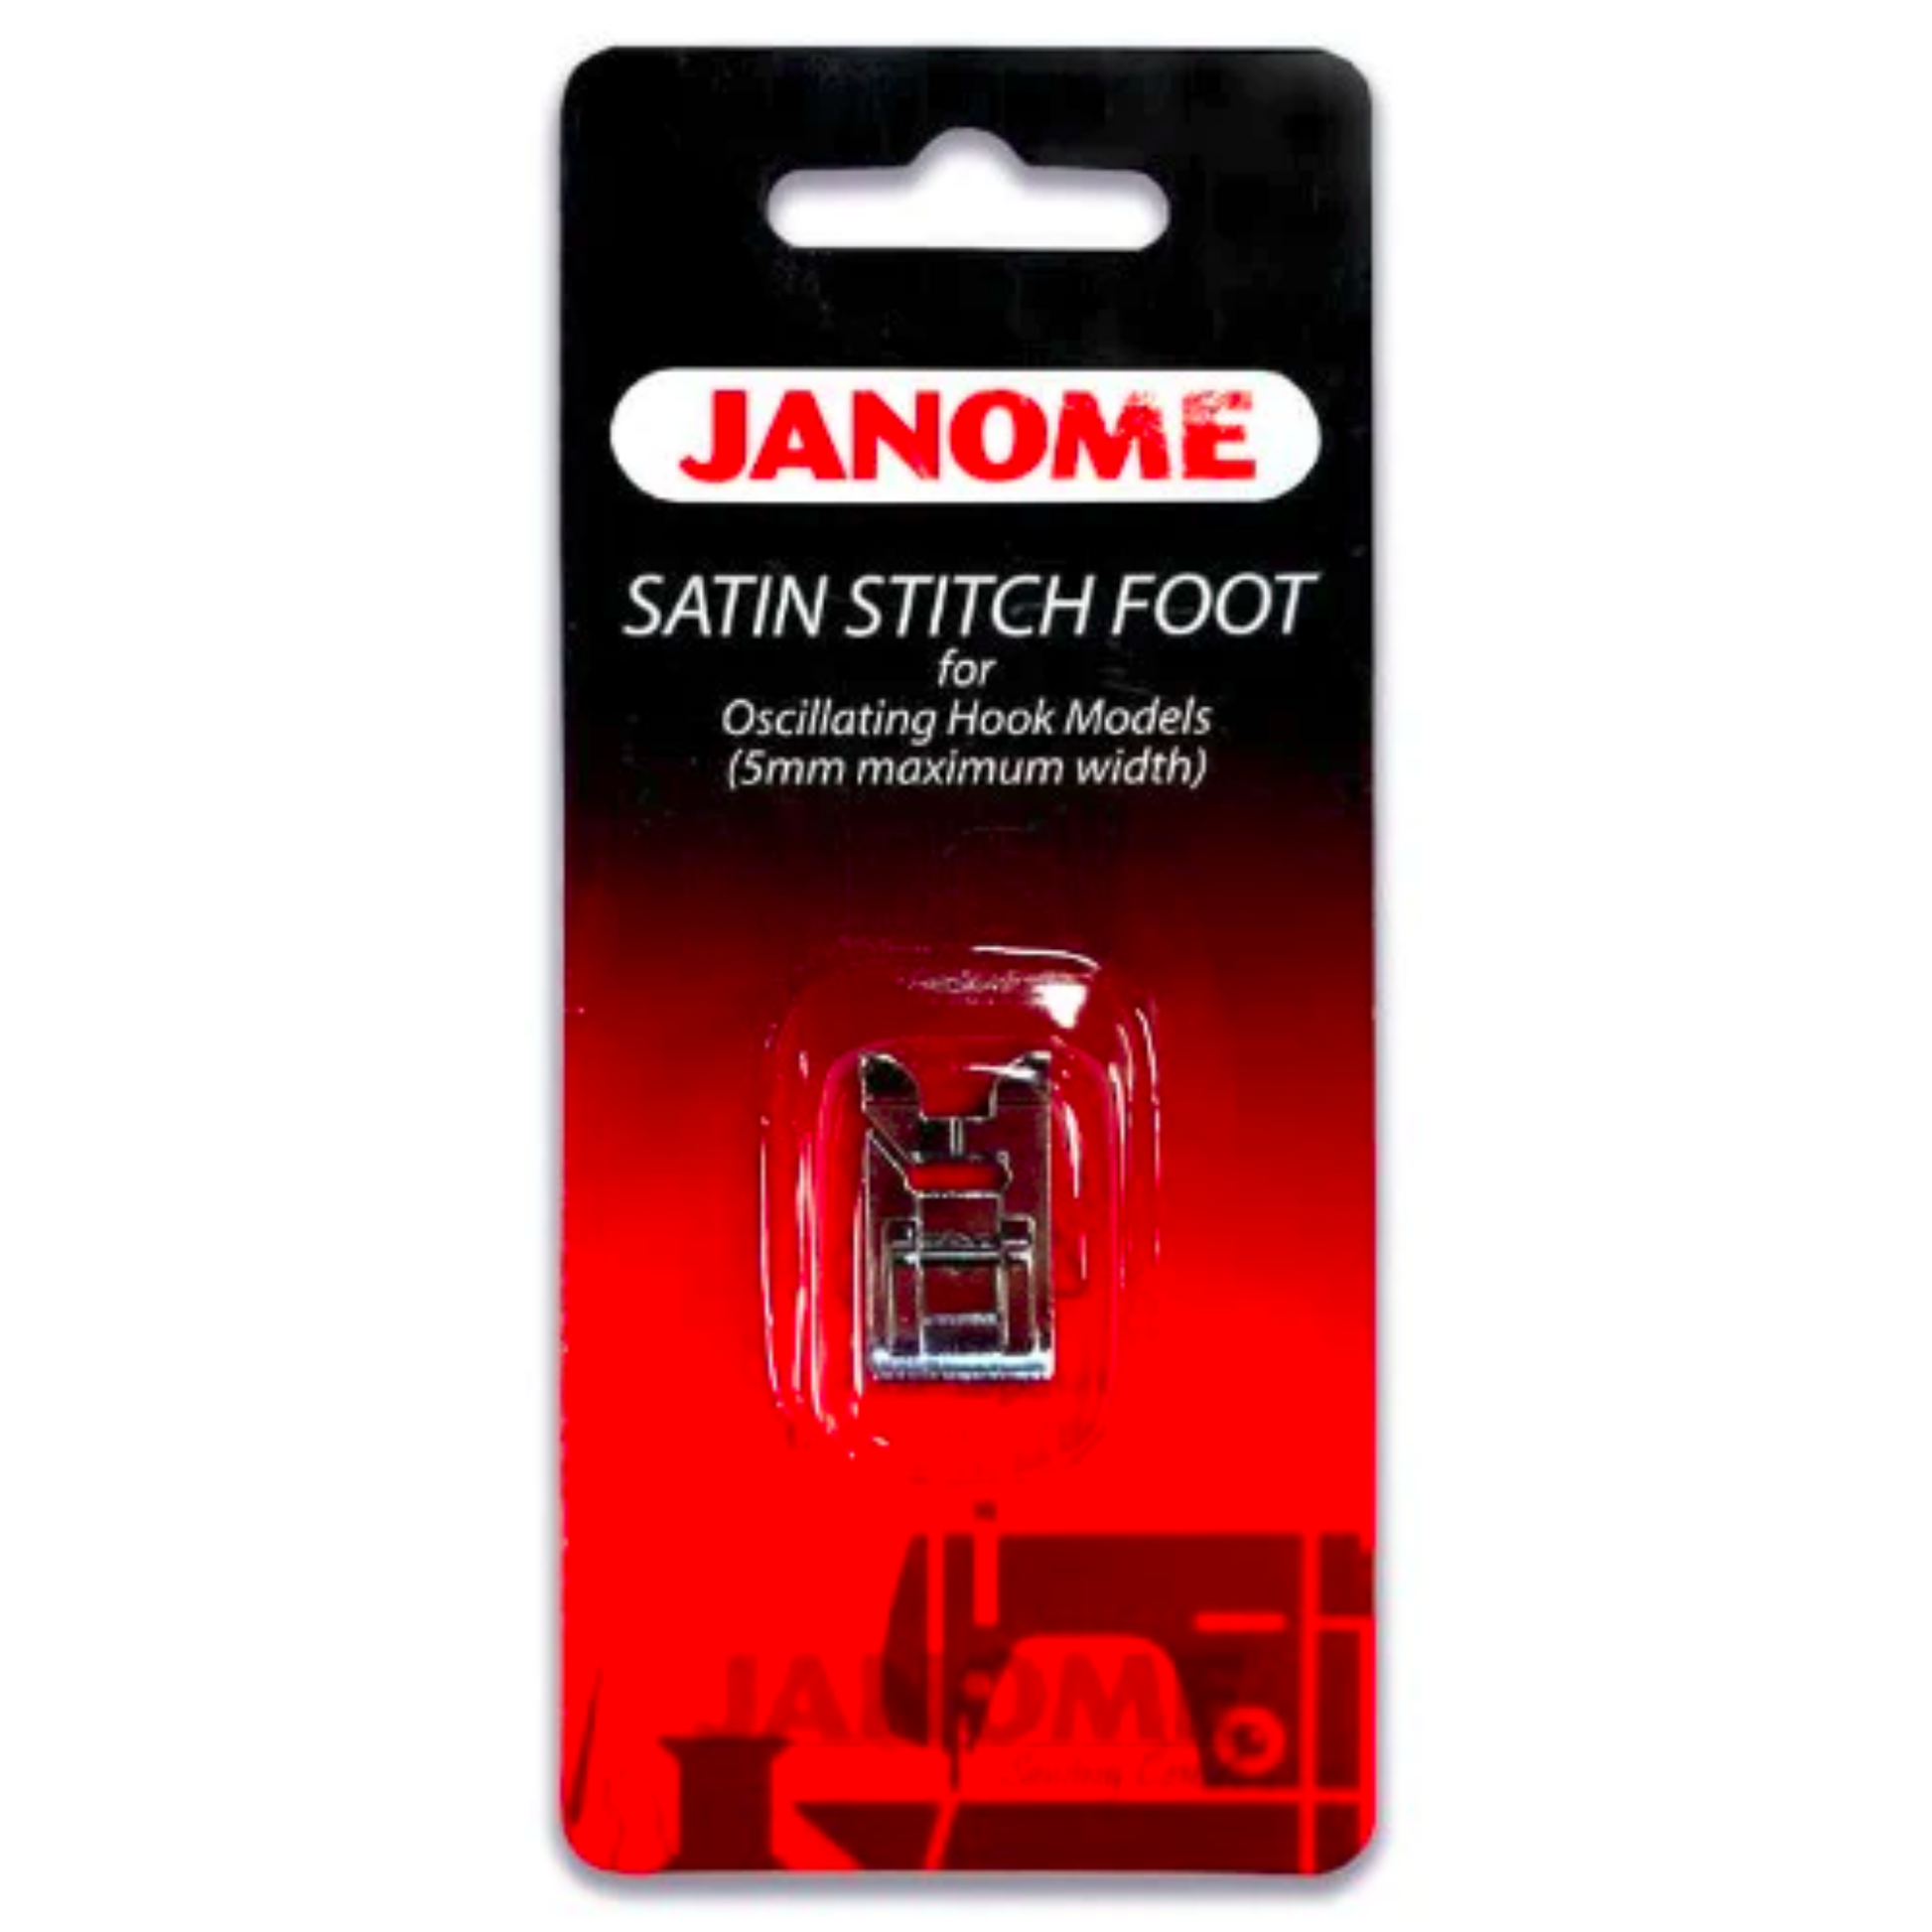 Janome  - Satin stitch foot - Silver - Packet